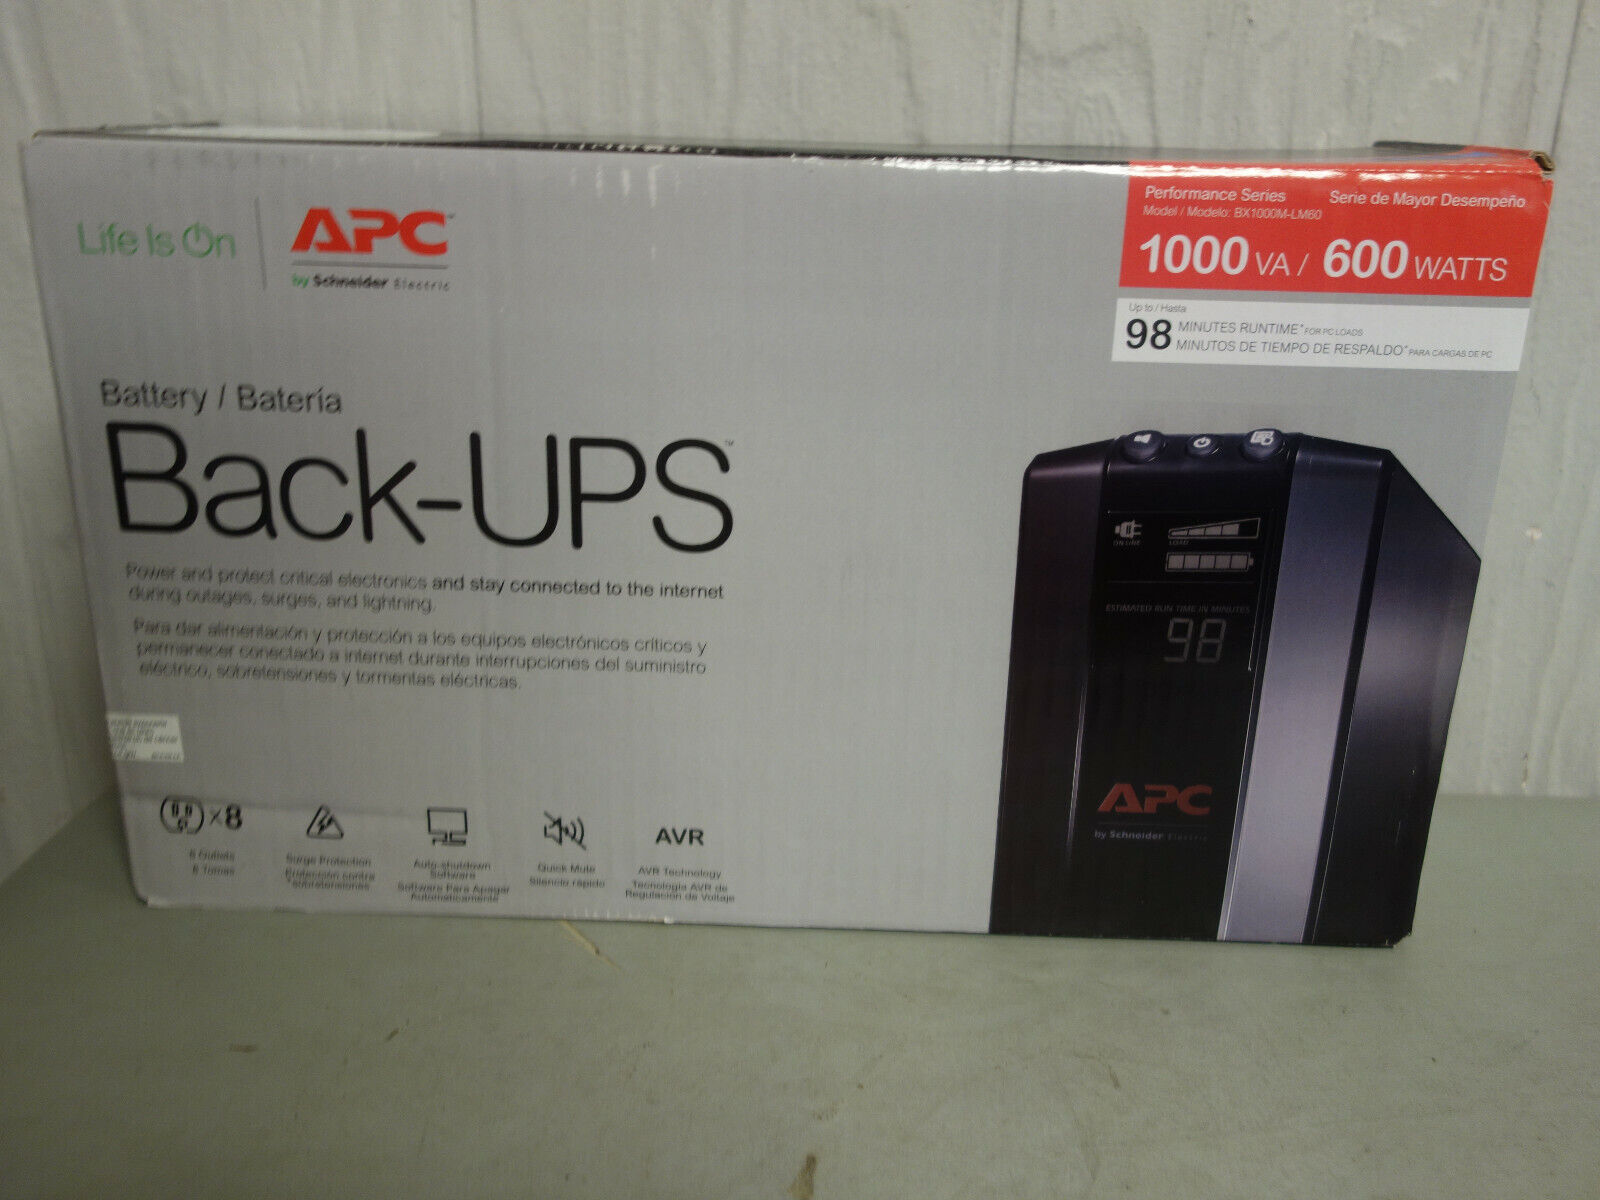 BACK-UPS PRO BX1000M COMPACT TOWER BATTERY BACKUP SYSTEM, 8 OUTLETS, 1000VA, 110